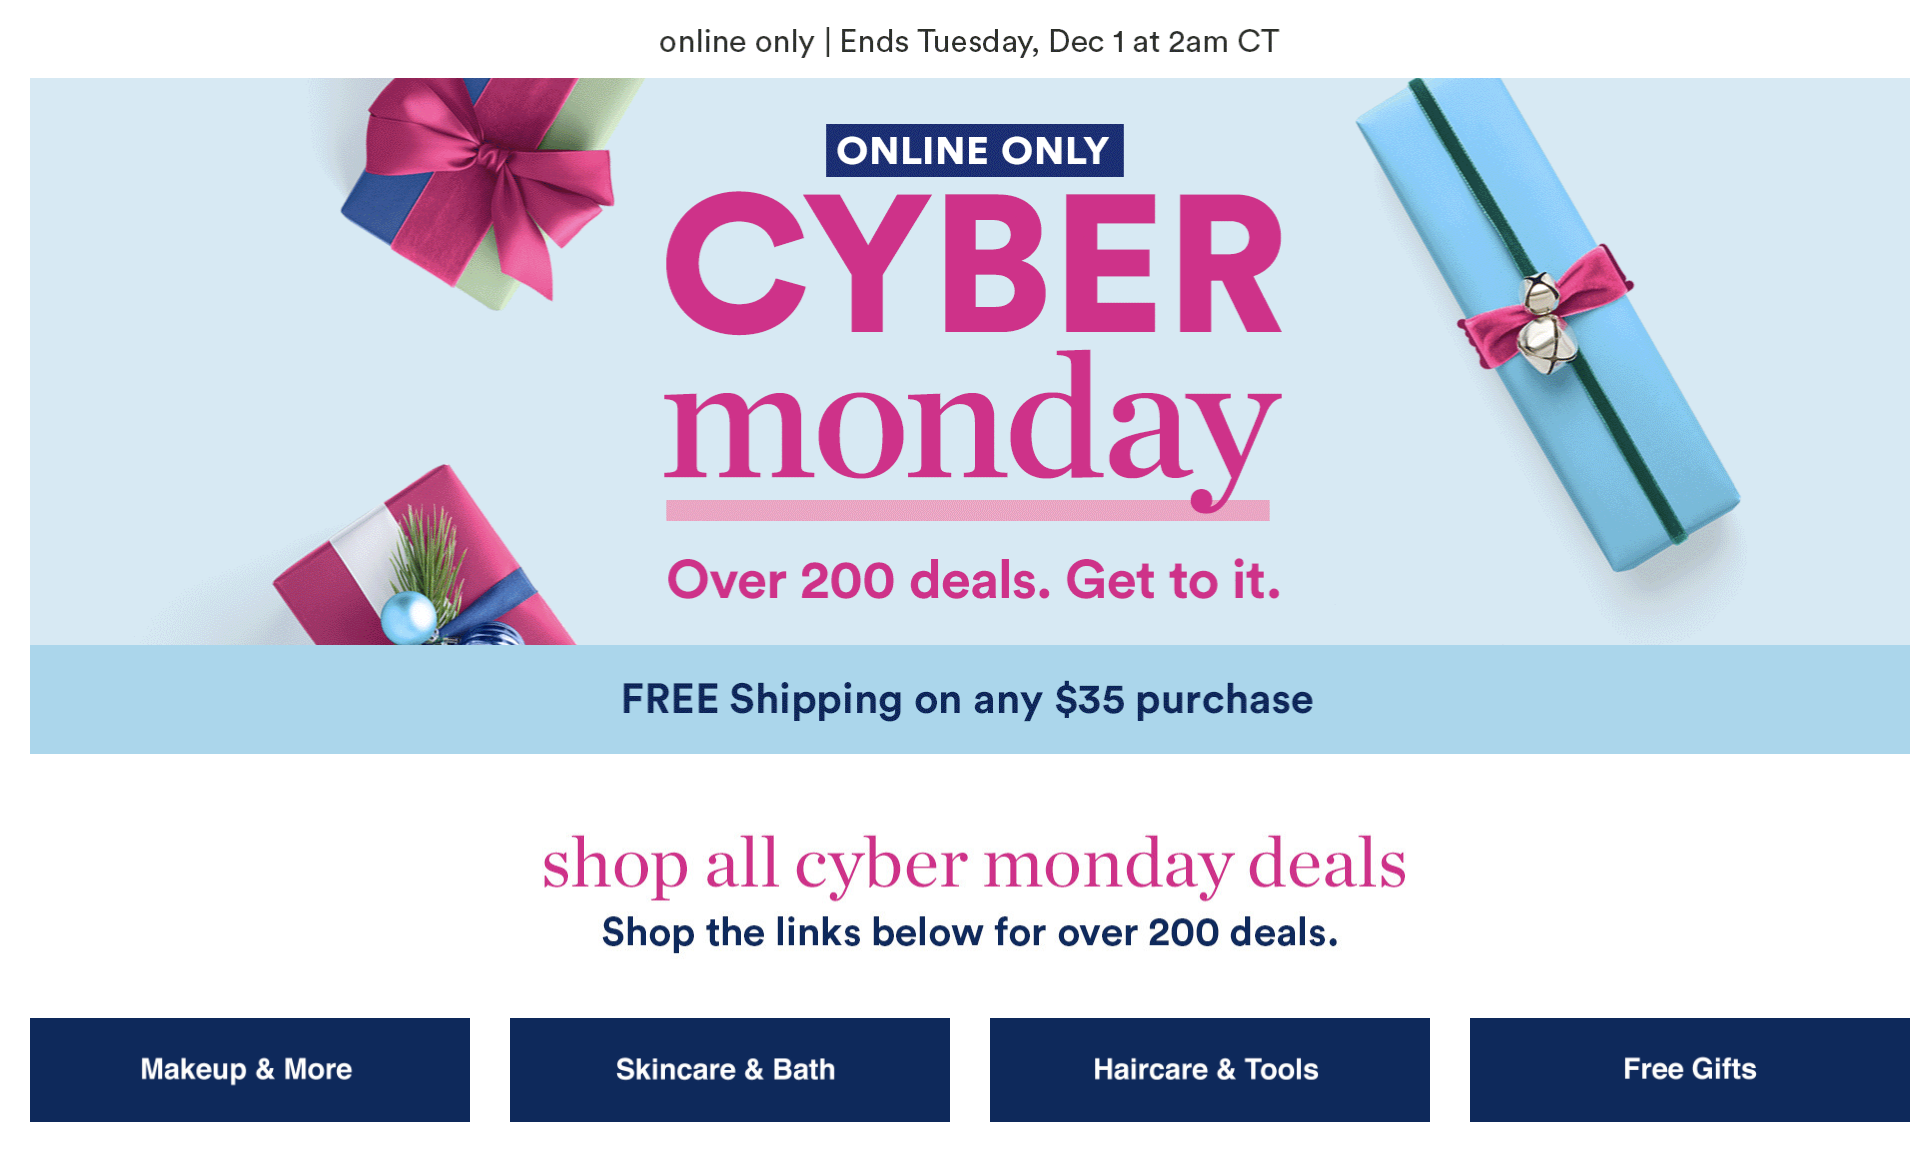 Ulta Cyber Monday has begun! Gift With Purchase